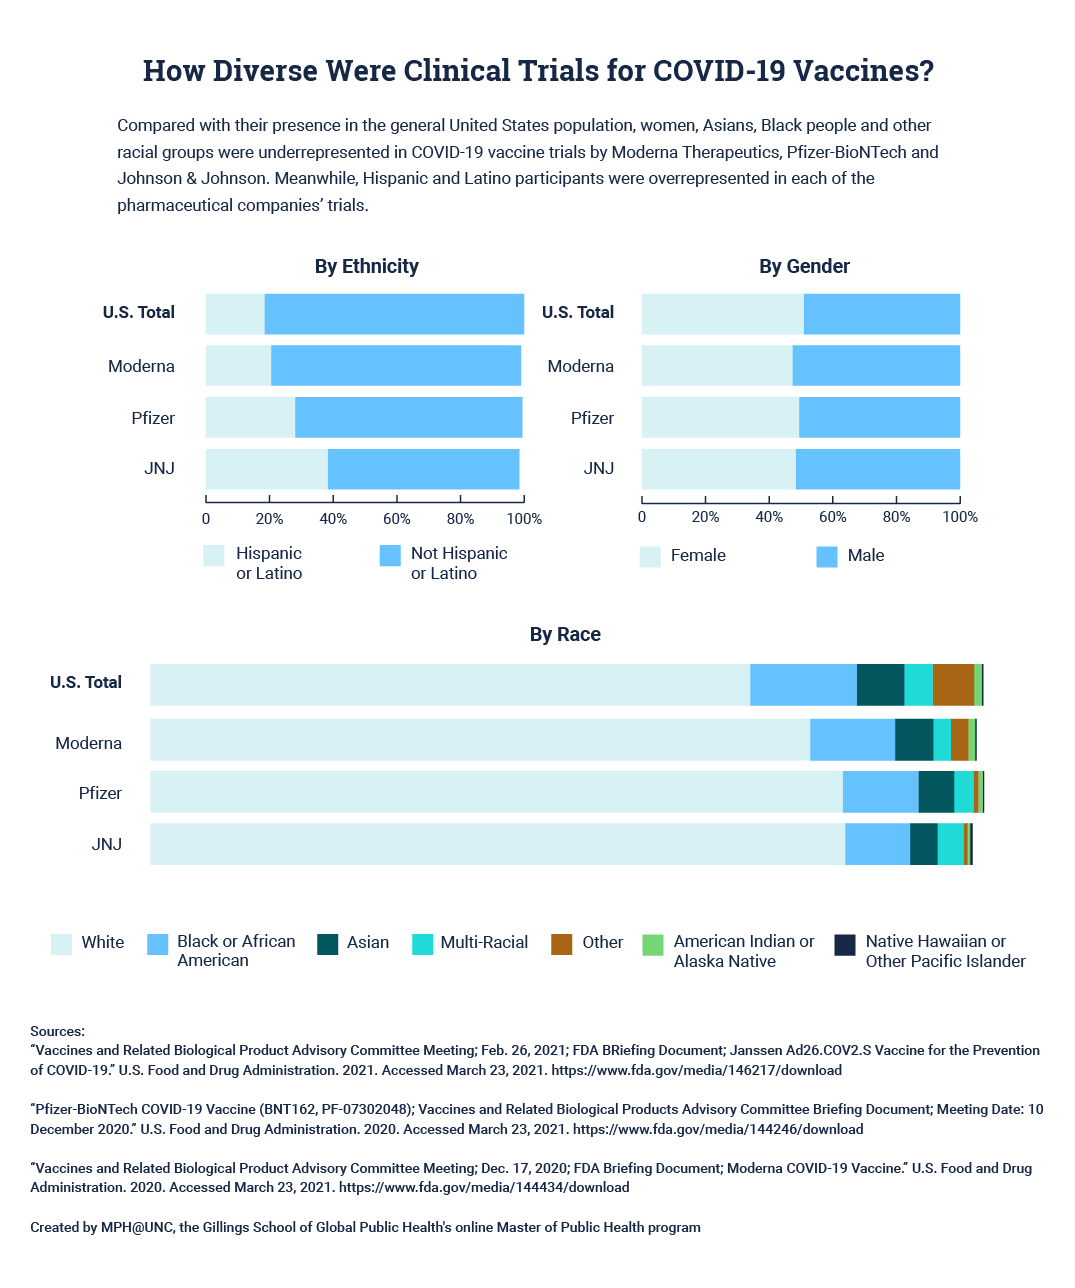 Bar charts showing Moderna Therapeutics, Pfizer-BioNTech and Johnson & Johnson COVID-19 vaccine trials broken down by ethnicity, gender and race.